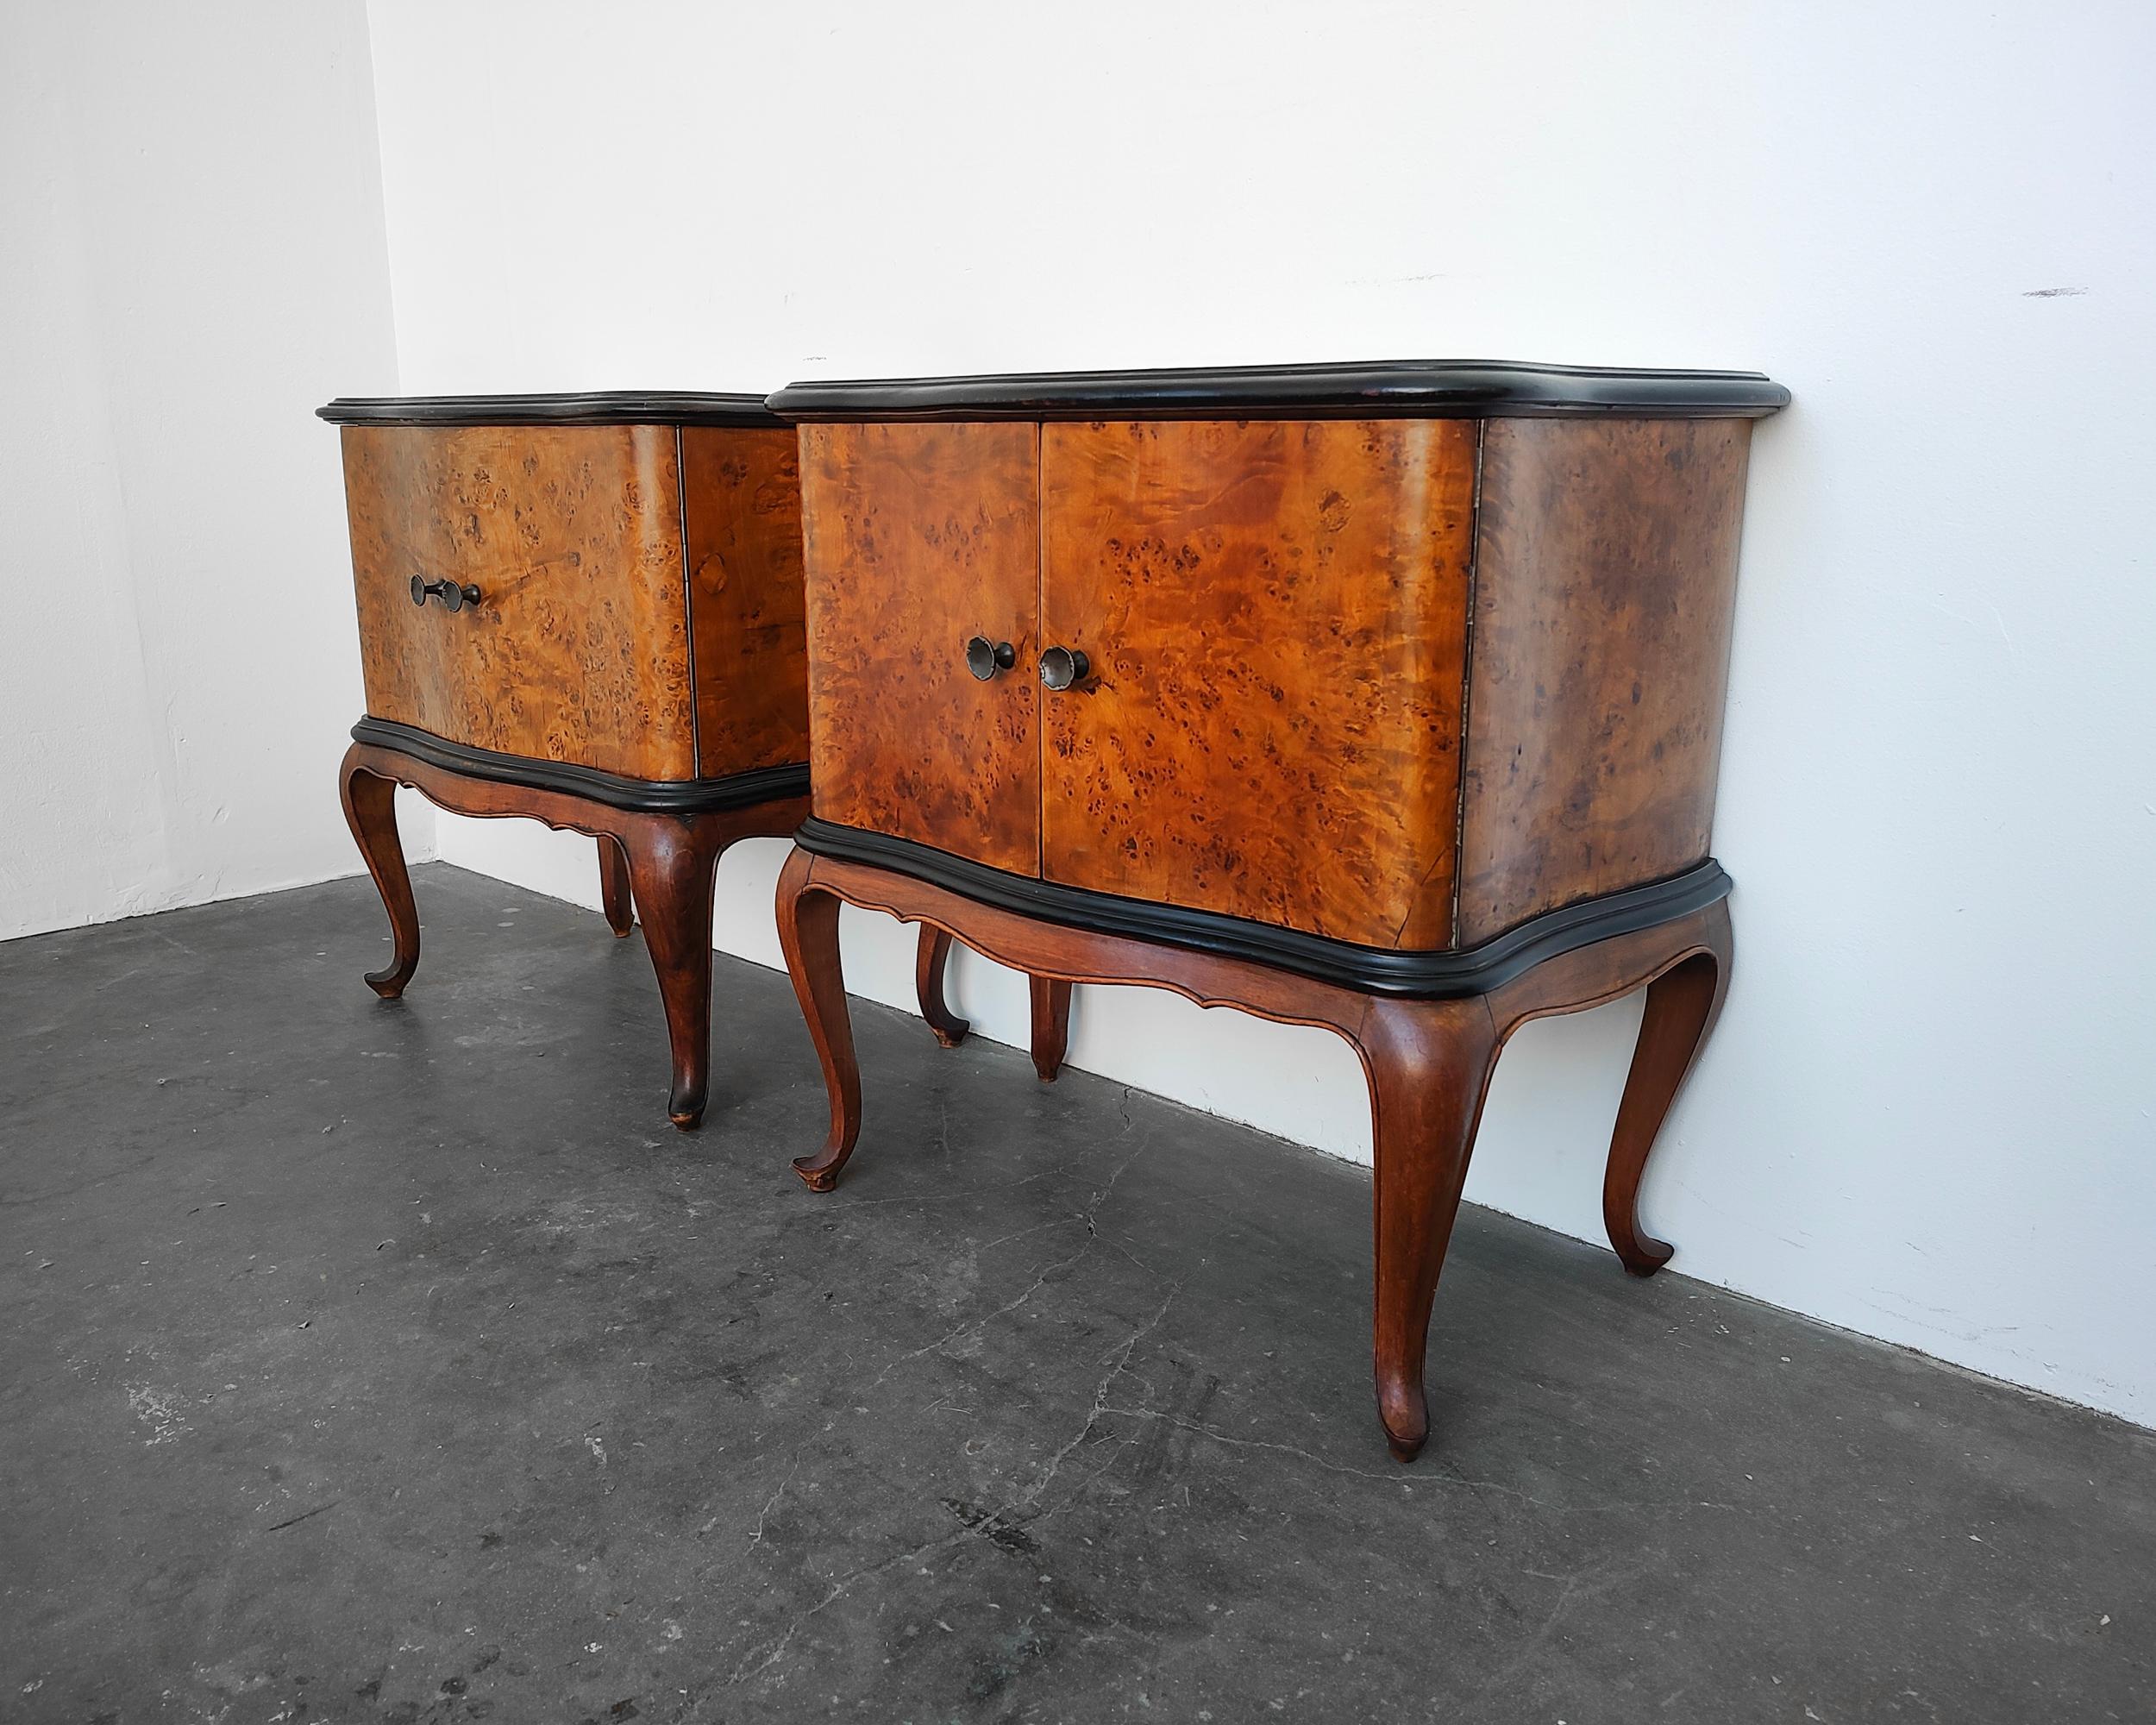 Set of two matching Queen Anne style burl bedside cabinets circa early 20th century.  Beautiful curved design details and contrasting black trim. Cabinet doors with brass knobs open to fixed shelf inside. Custom made protective glass sits on top.